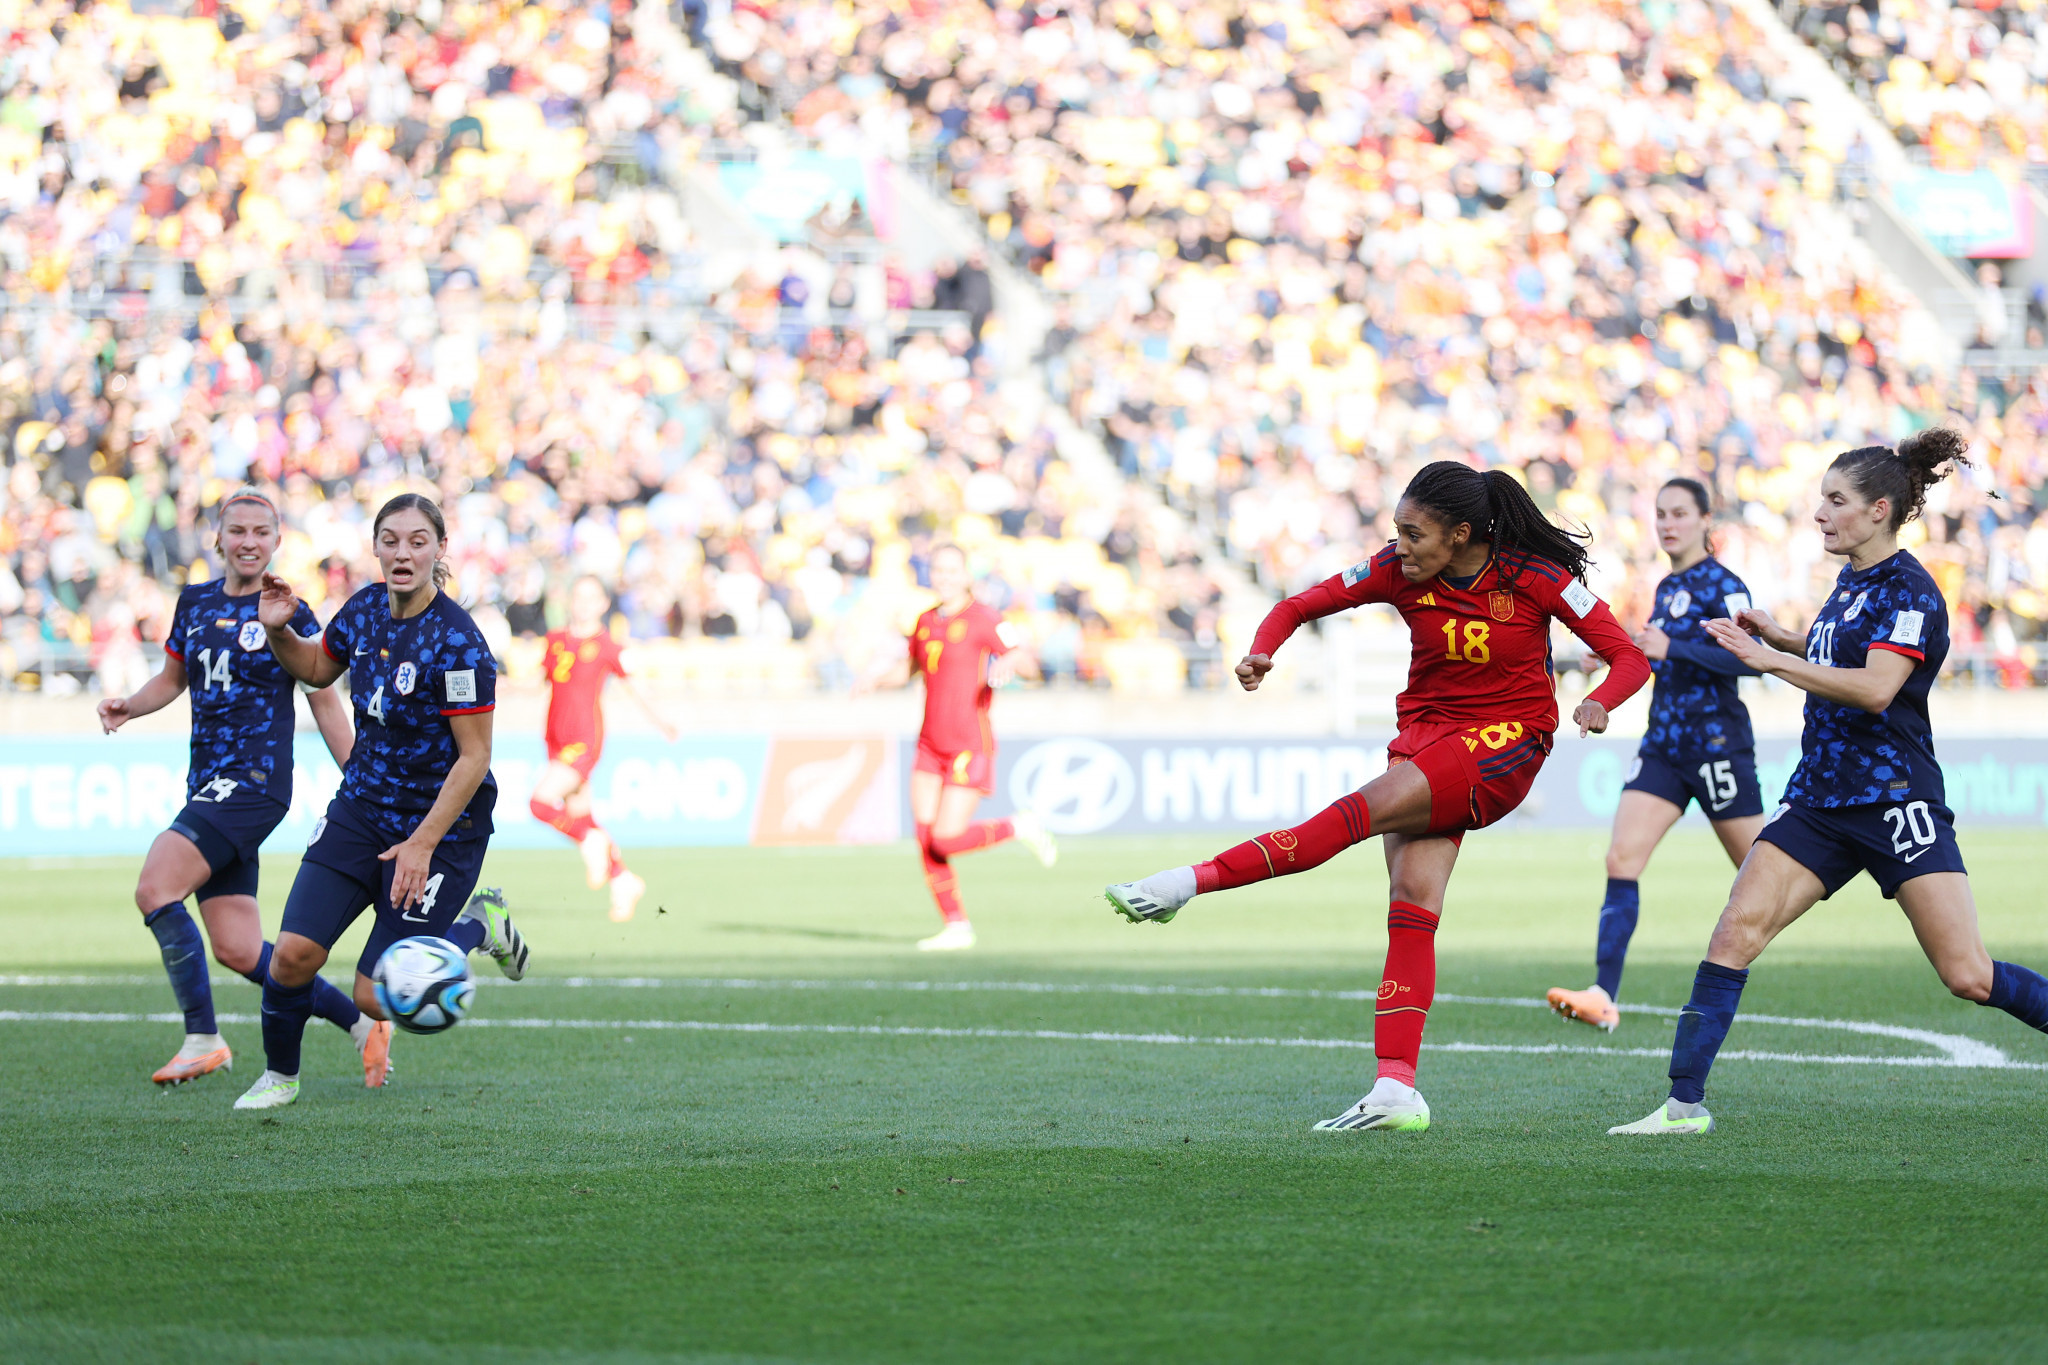 The 19-year-old substitute Salma Paralluelo then propelled Spain to the semi-final and became her country's youngest scorer at the Women's World Cup ©Getty Images